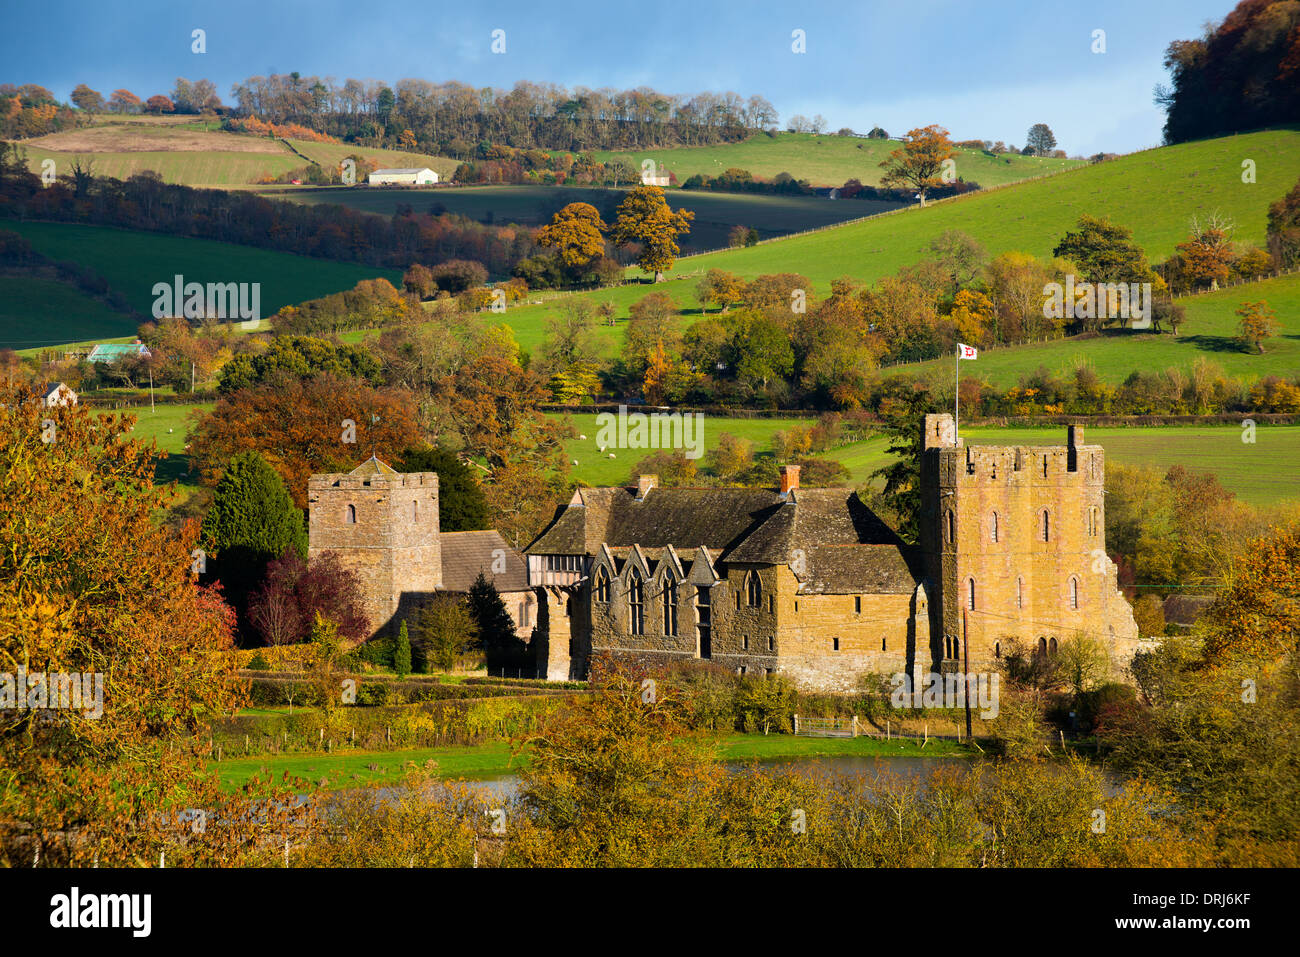 Stokesay Castle, a fortified manor house, in Autumn, Shropshire, England. Stock Photo